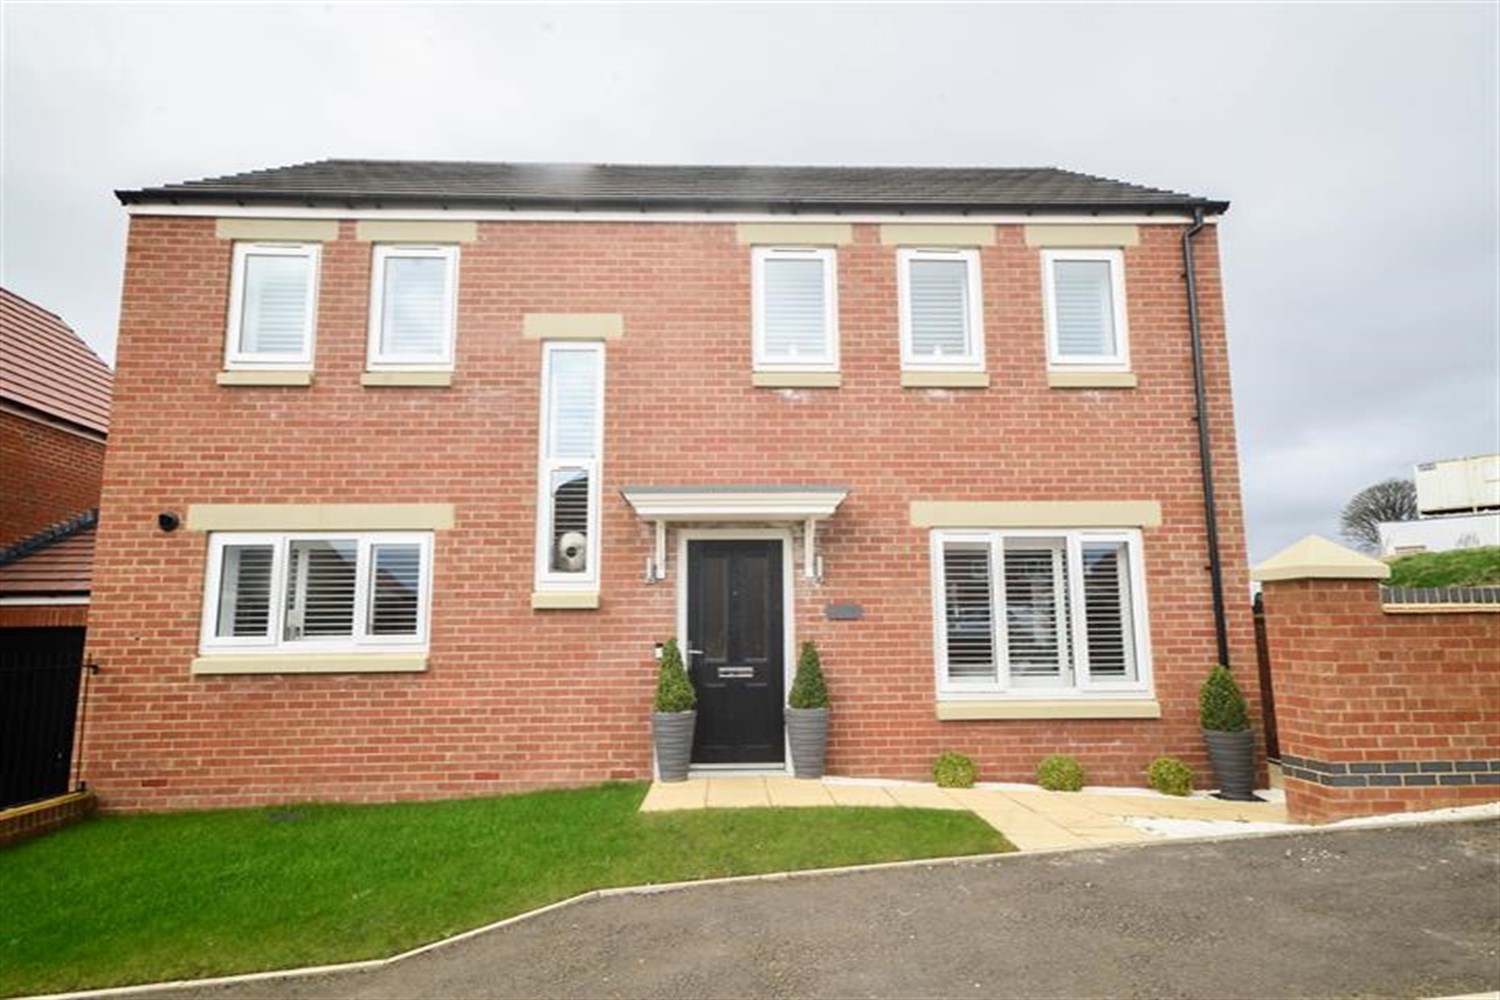 4 bed detached house for sale in Danmark Way, Sunderland  - Property Image 1